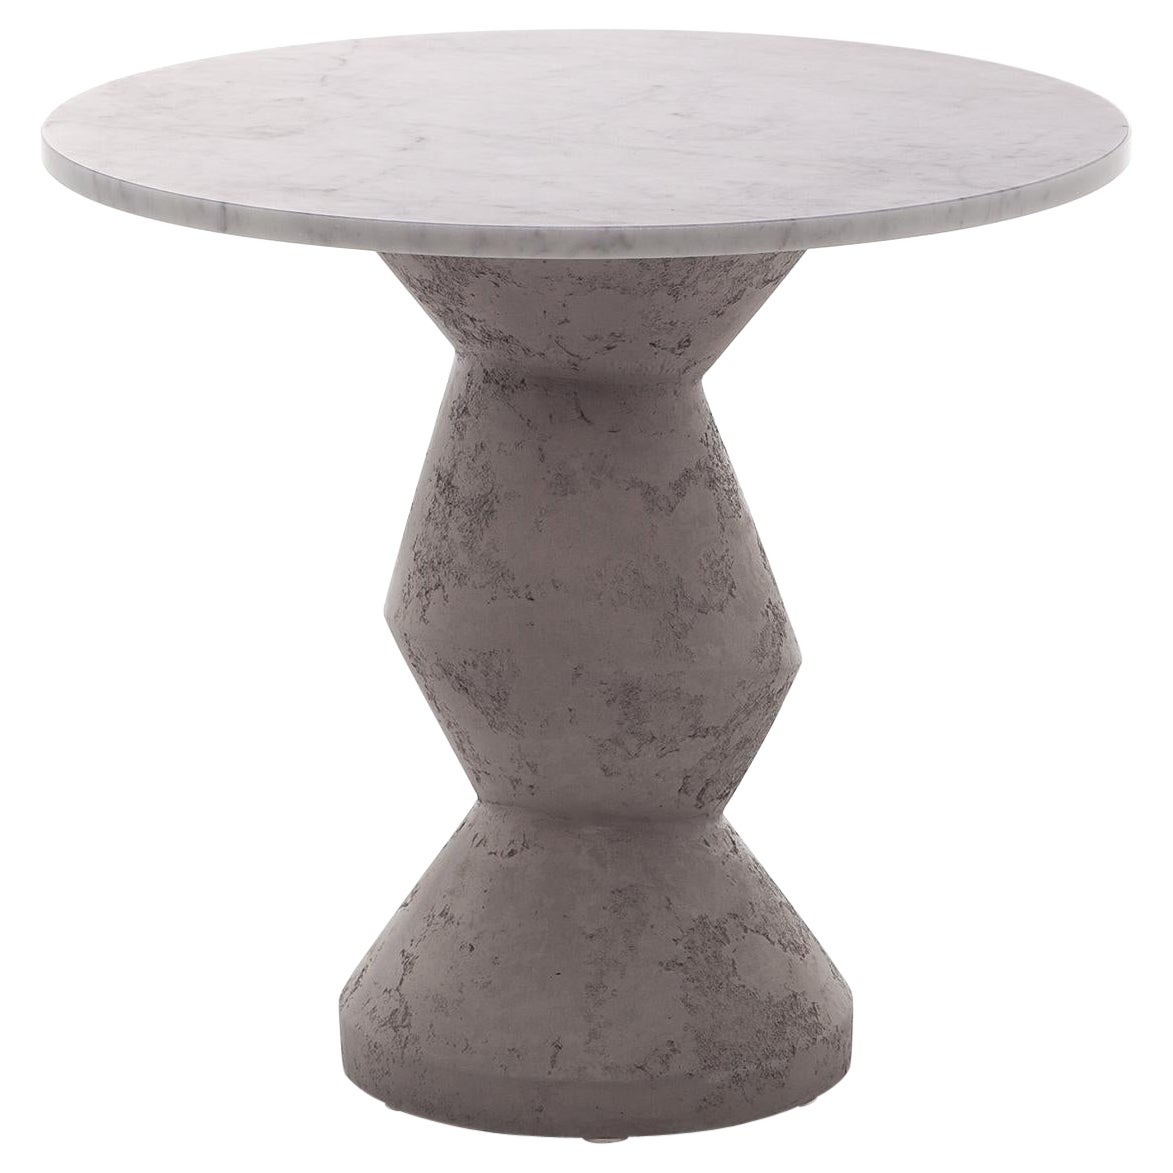 Gervasoni Large Inout 838 Table in White Carrara Marble Top & Crackle Concrete